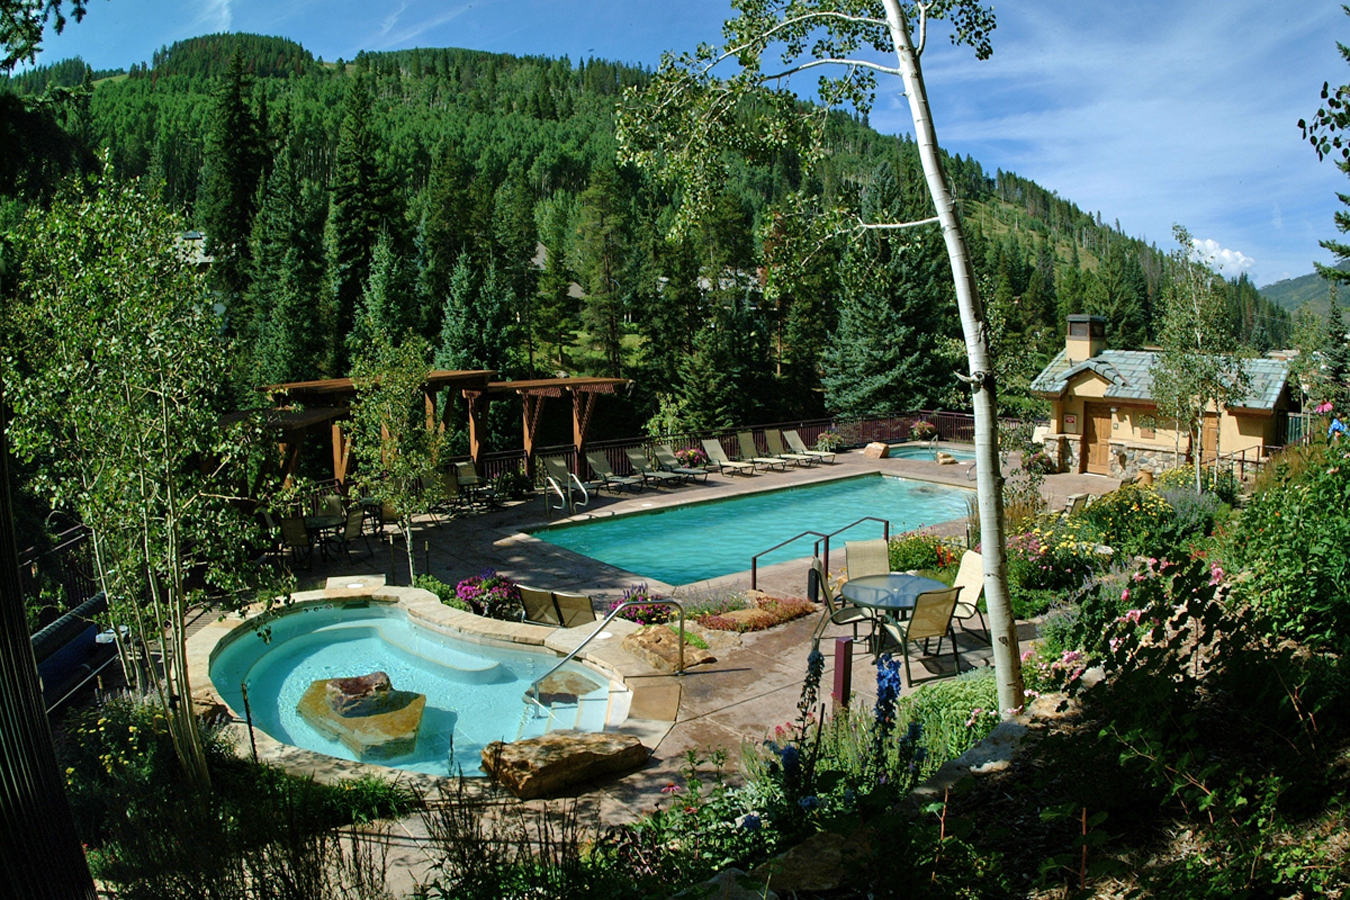 The popular Antlers at Vail “pool with a view” overlooking Gore Creek and Vail Mountain is open year-round for guests.